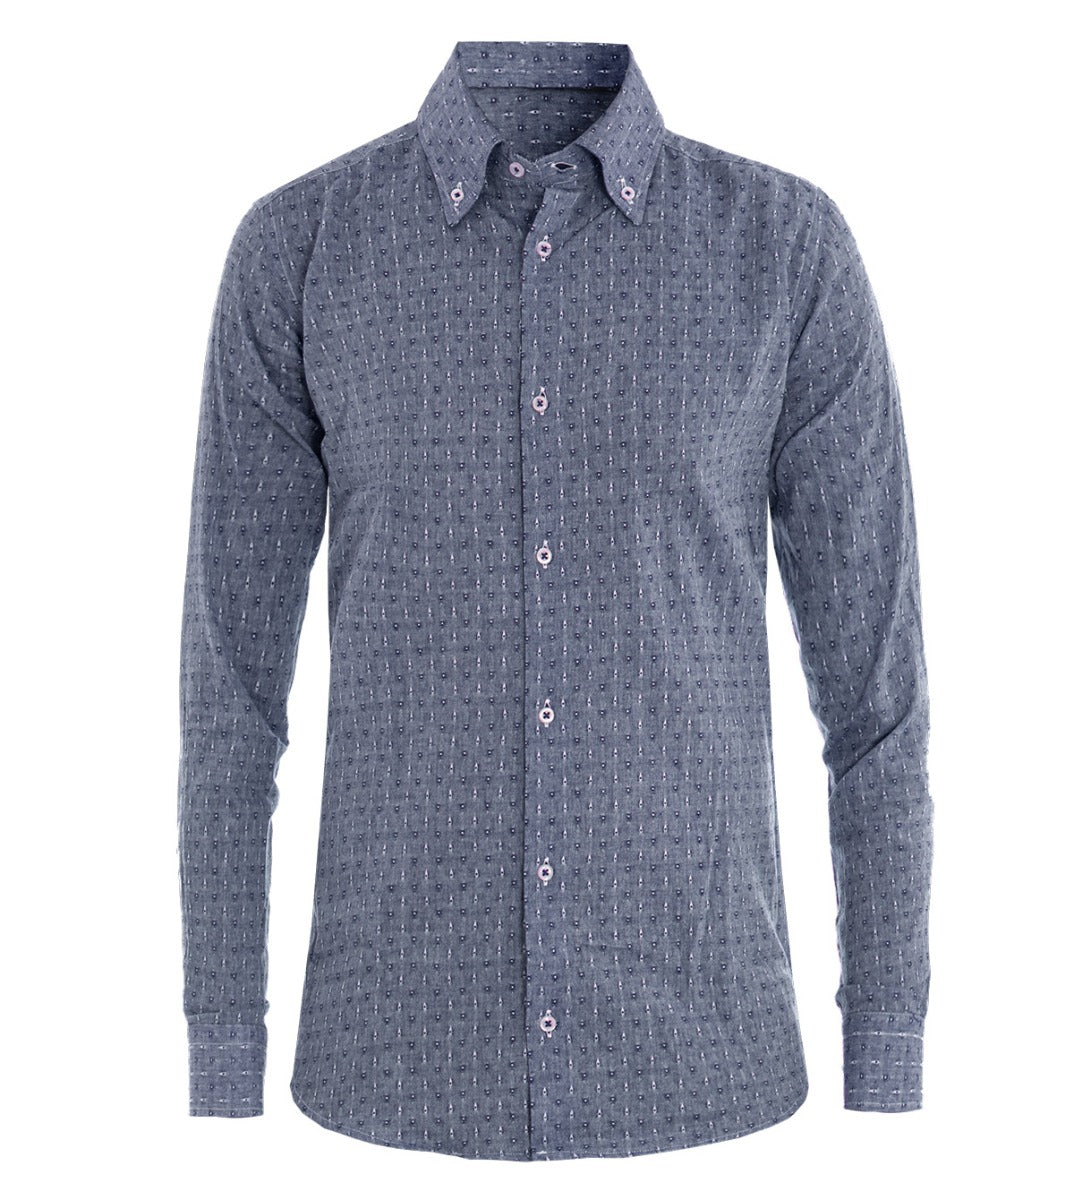 Men's Shirt With Collar Long Sleeve Slim Fit Casual Cotton Polka Dot Pattern Blue GIOSAL-C1468A